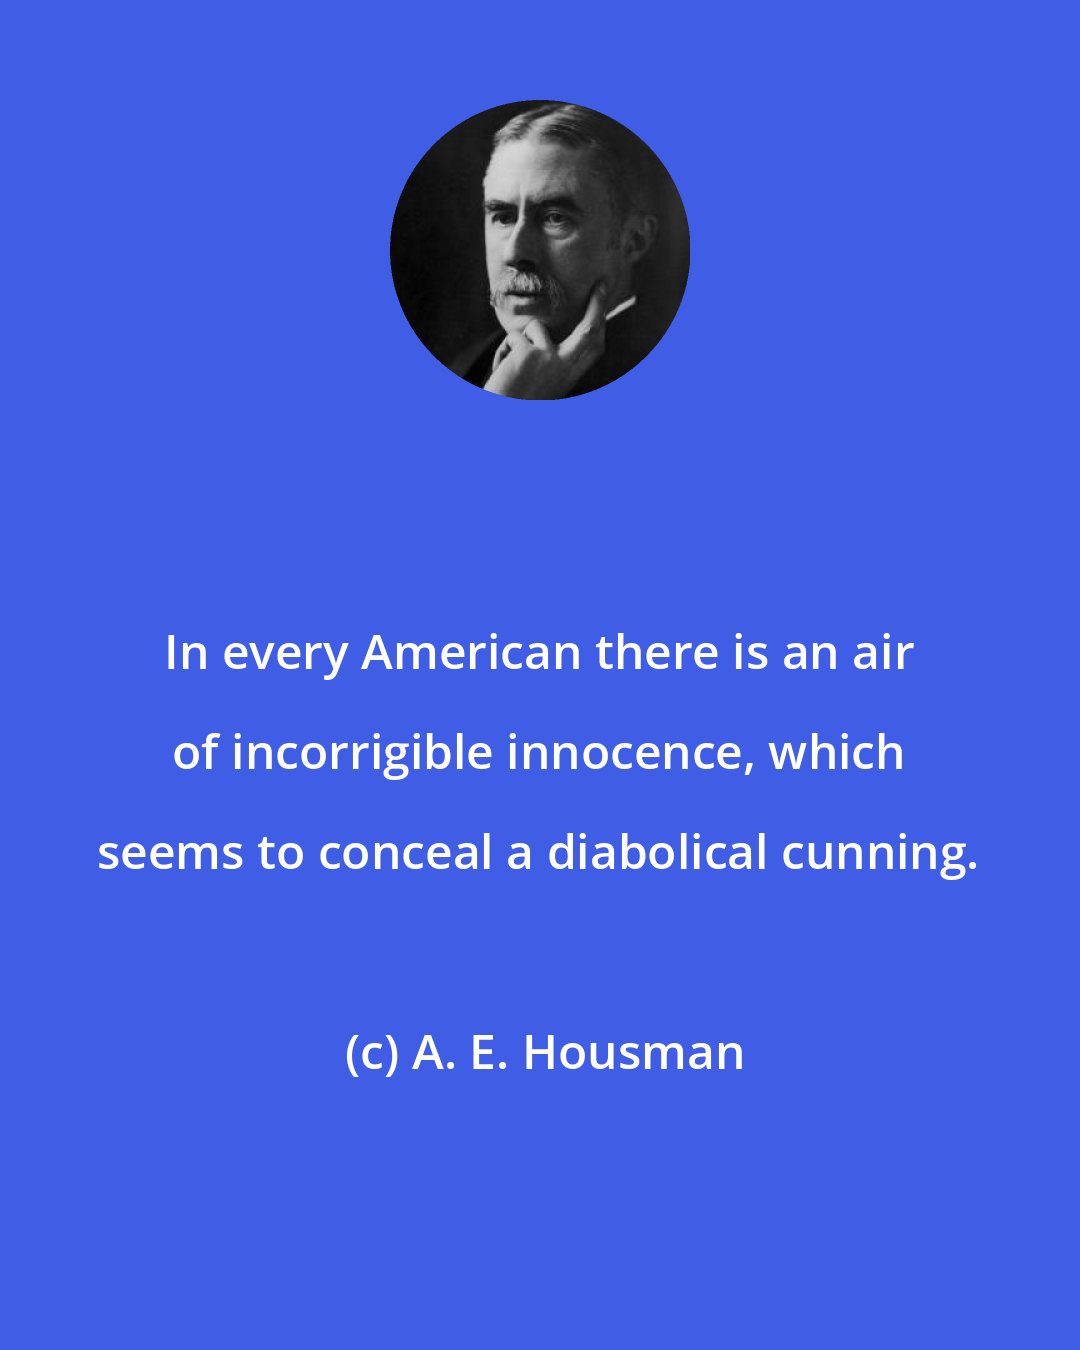 A. E. Housman: In every American there is an air of incorrigible innocence, which seems to conceal a diabolical cunning.